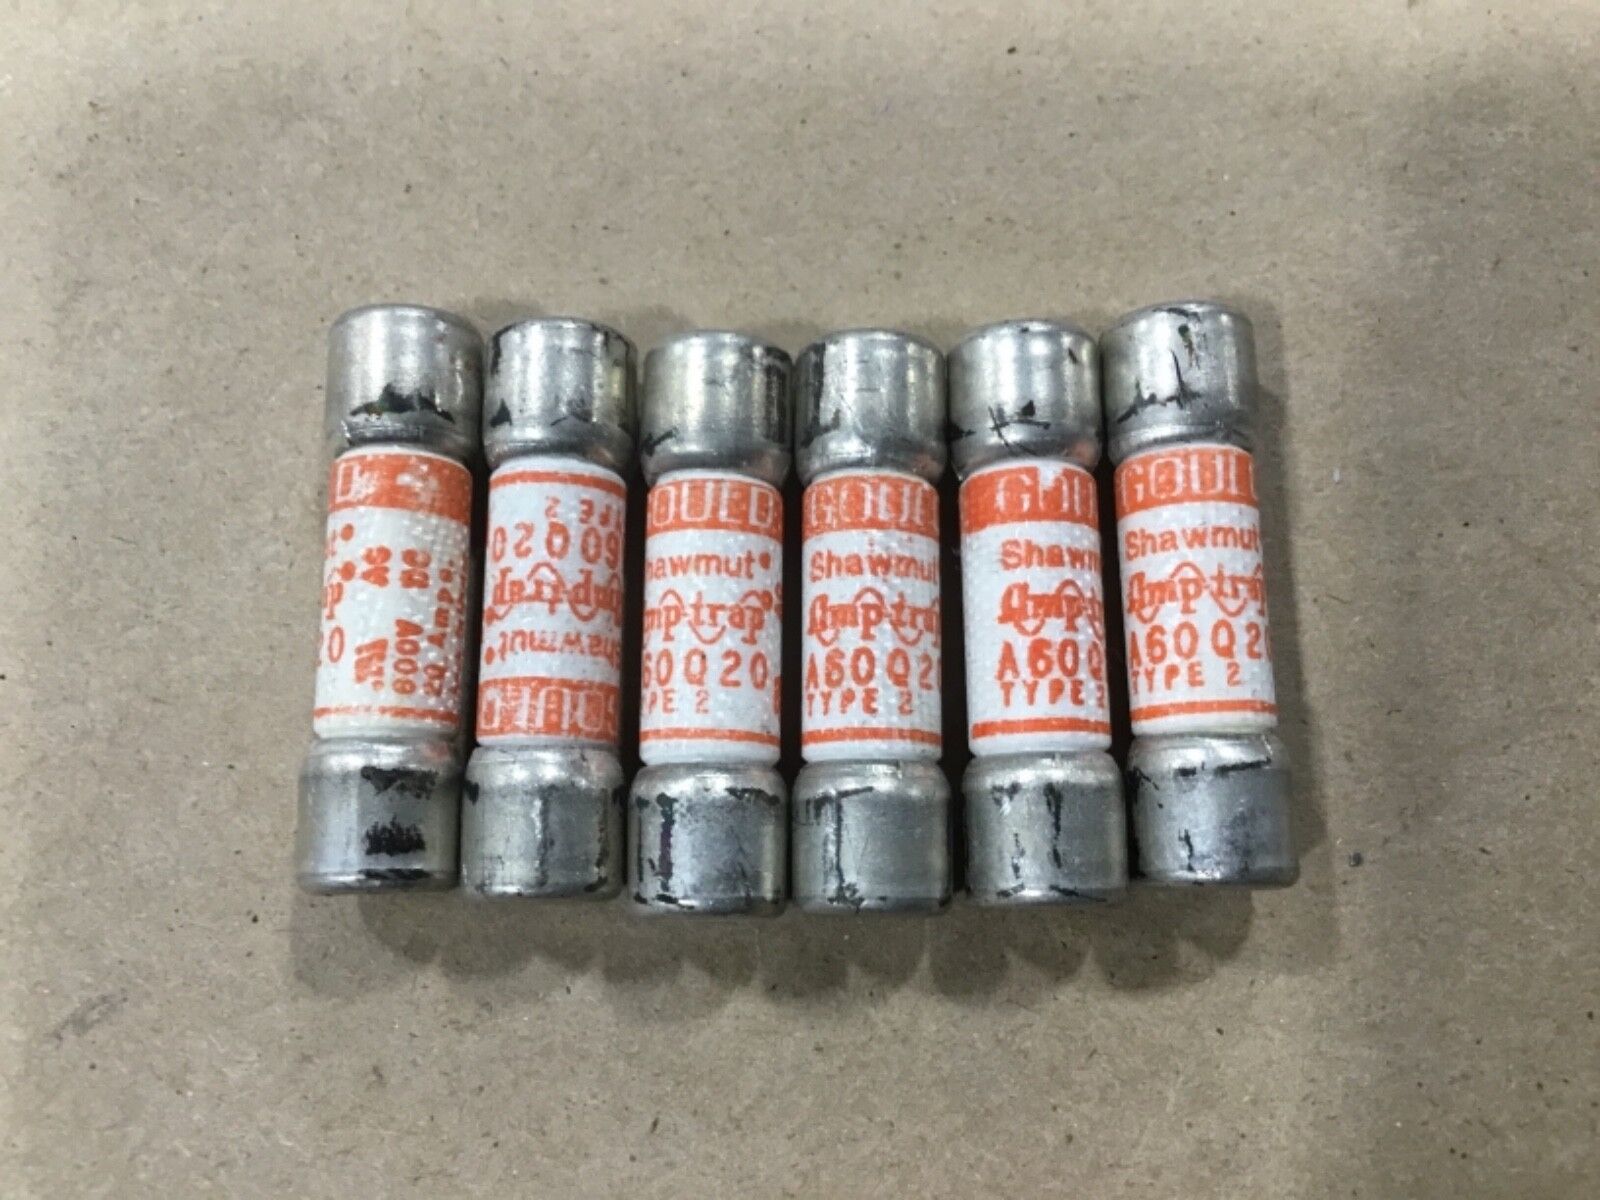 Lot Of 6 Gould Shawmut A60Q20 Fuses Fuse 20A 600V Semiconductor Type 2 #27A38